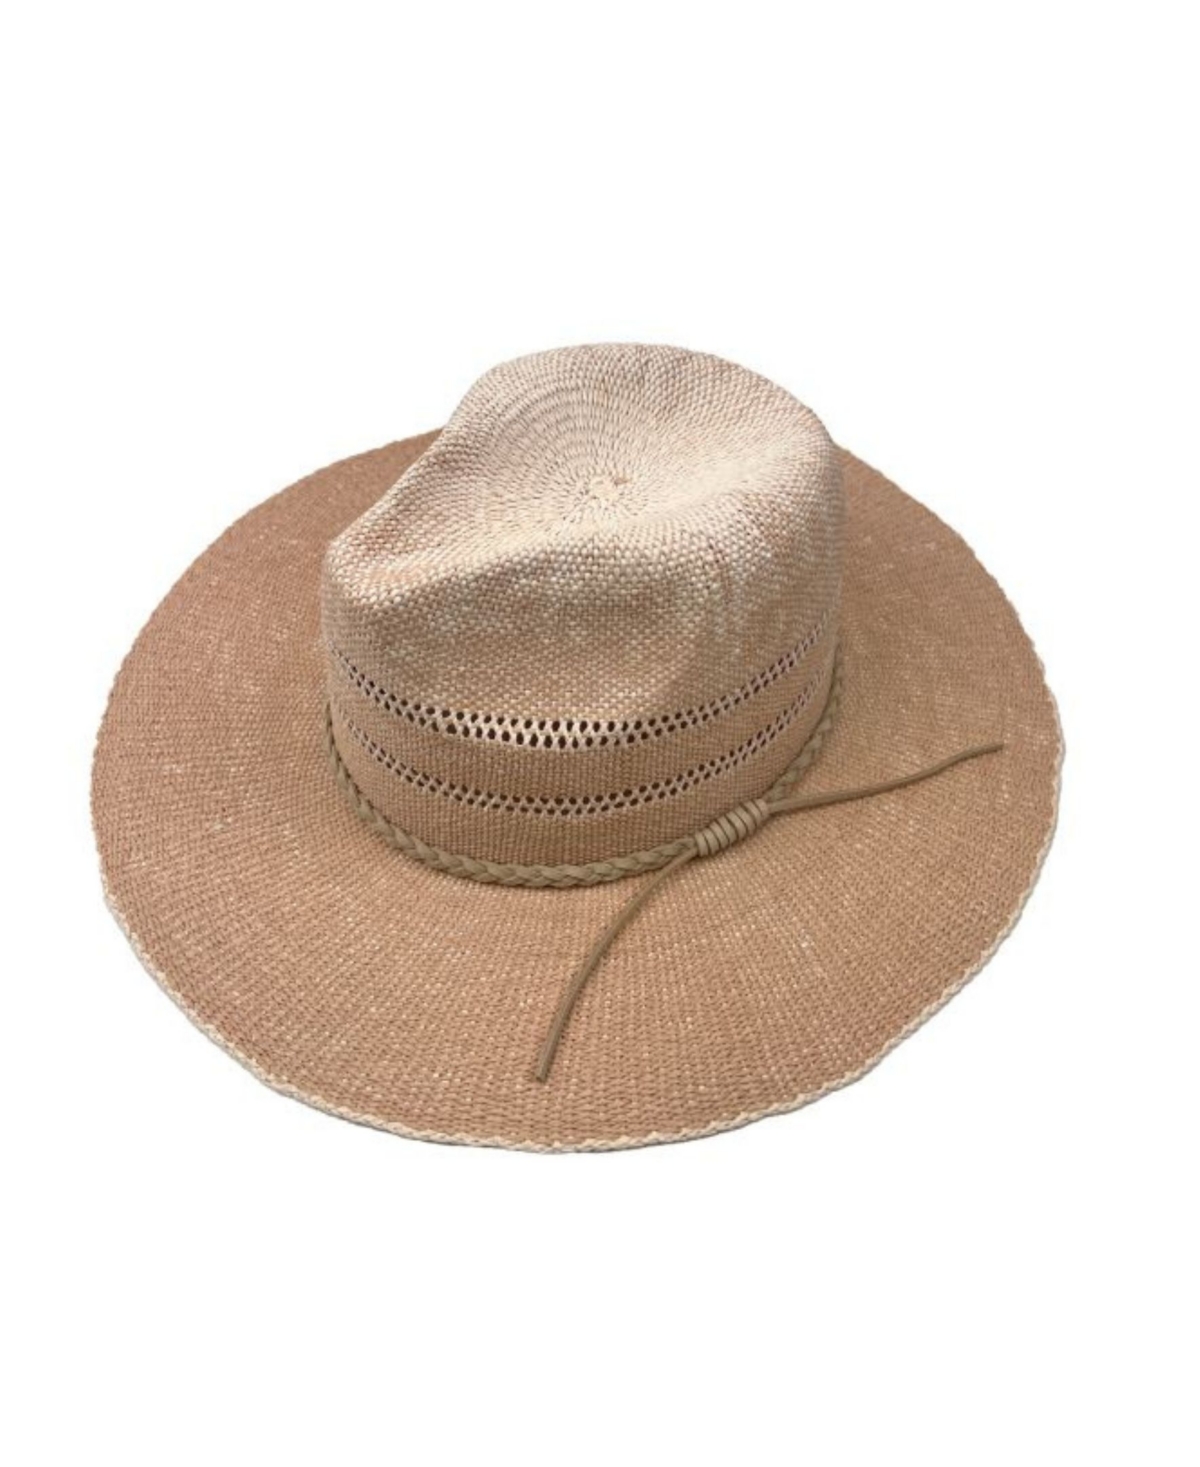 Shop Marcus Adler Women's Straw Panama Hat With Suede Braided Trim In Blush